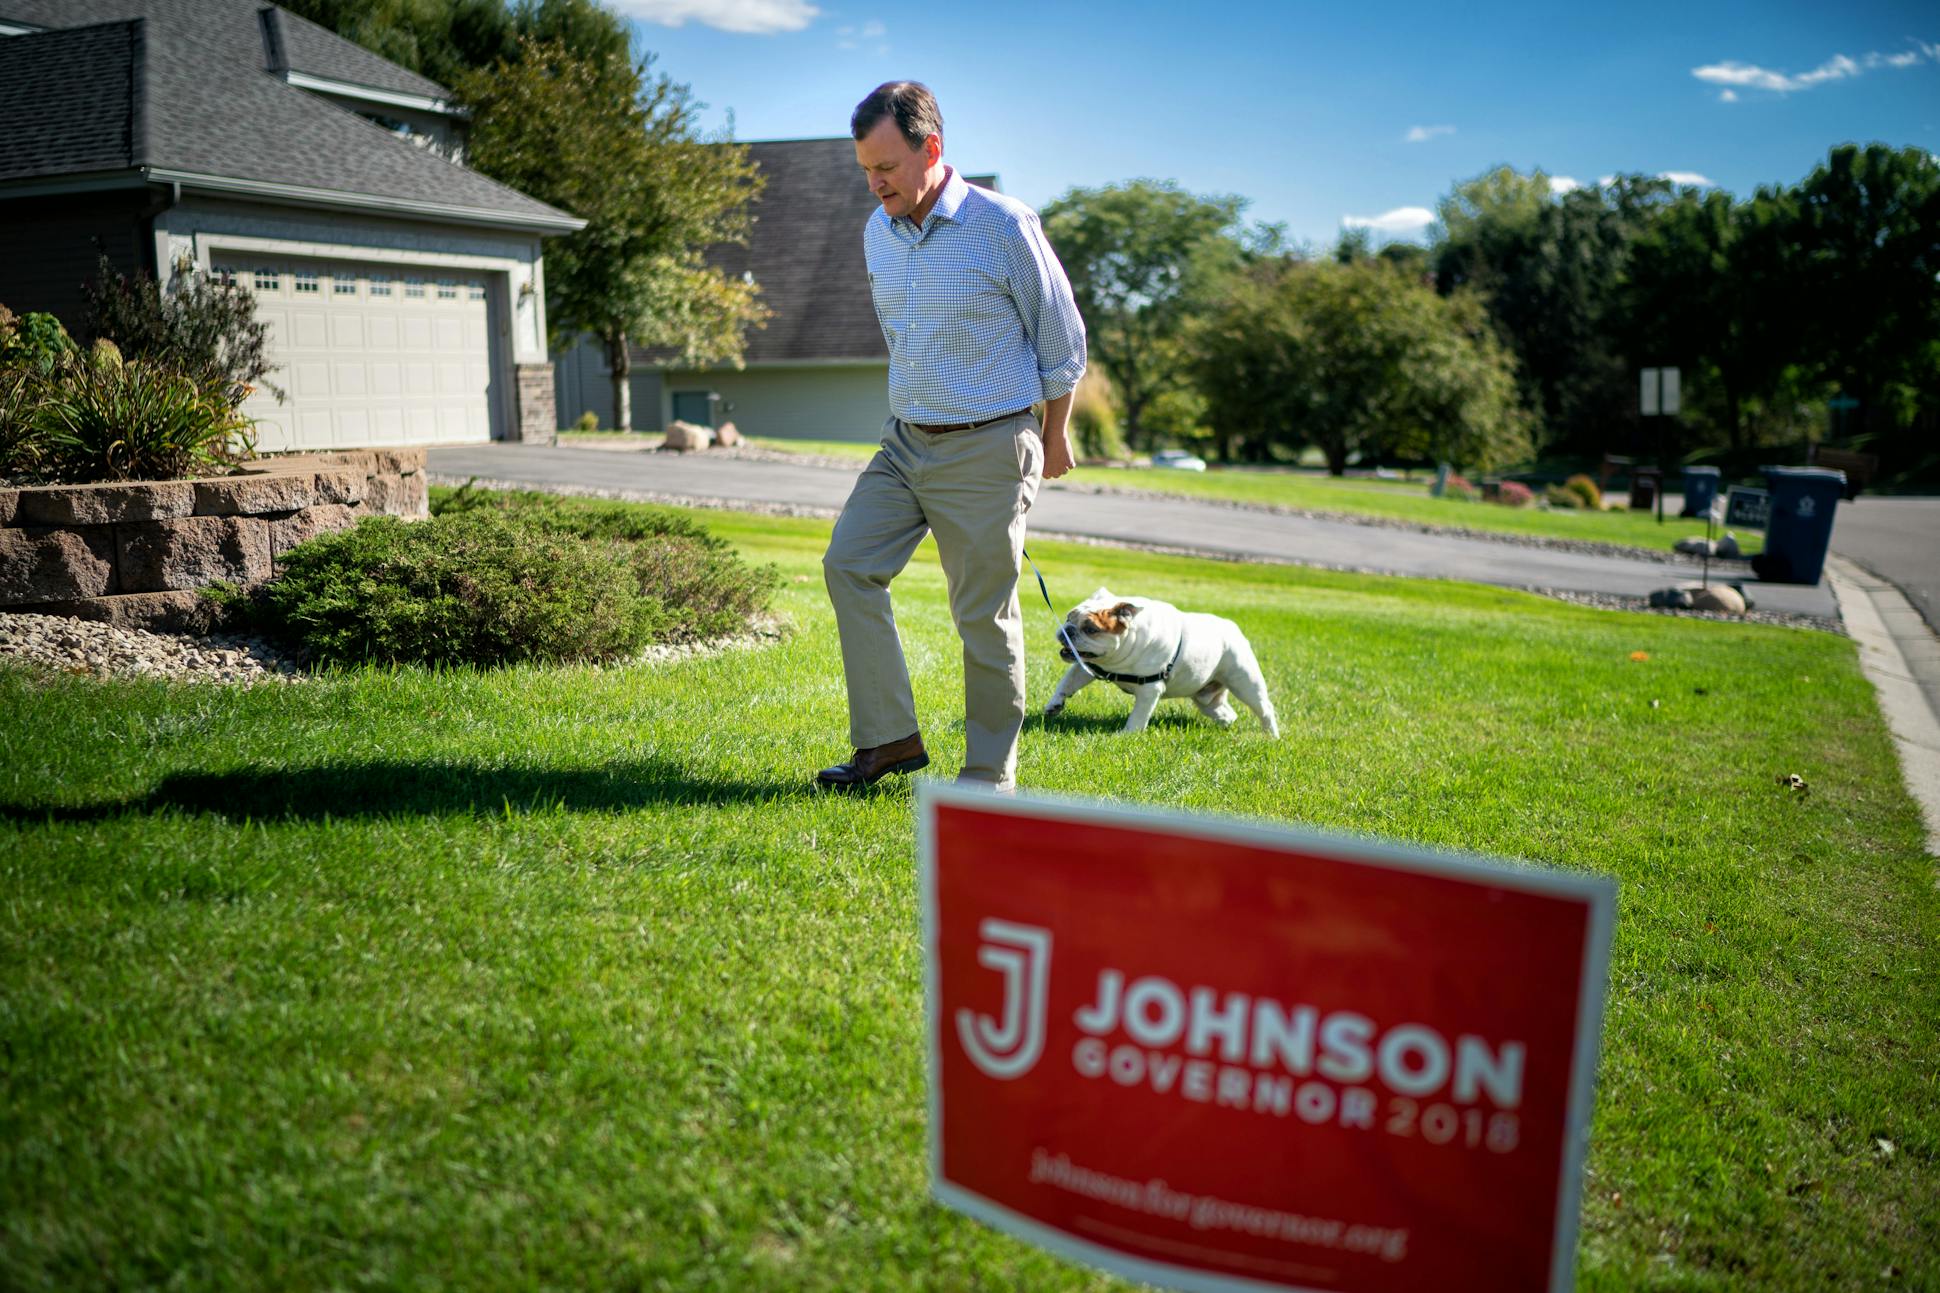 Johnson took his bulldog Chester for a walk before he headed out for an evening fundraiser in Minneapolis.